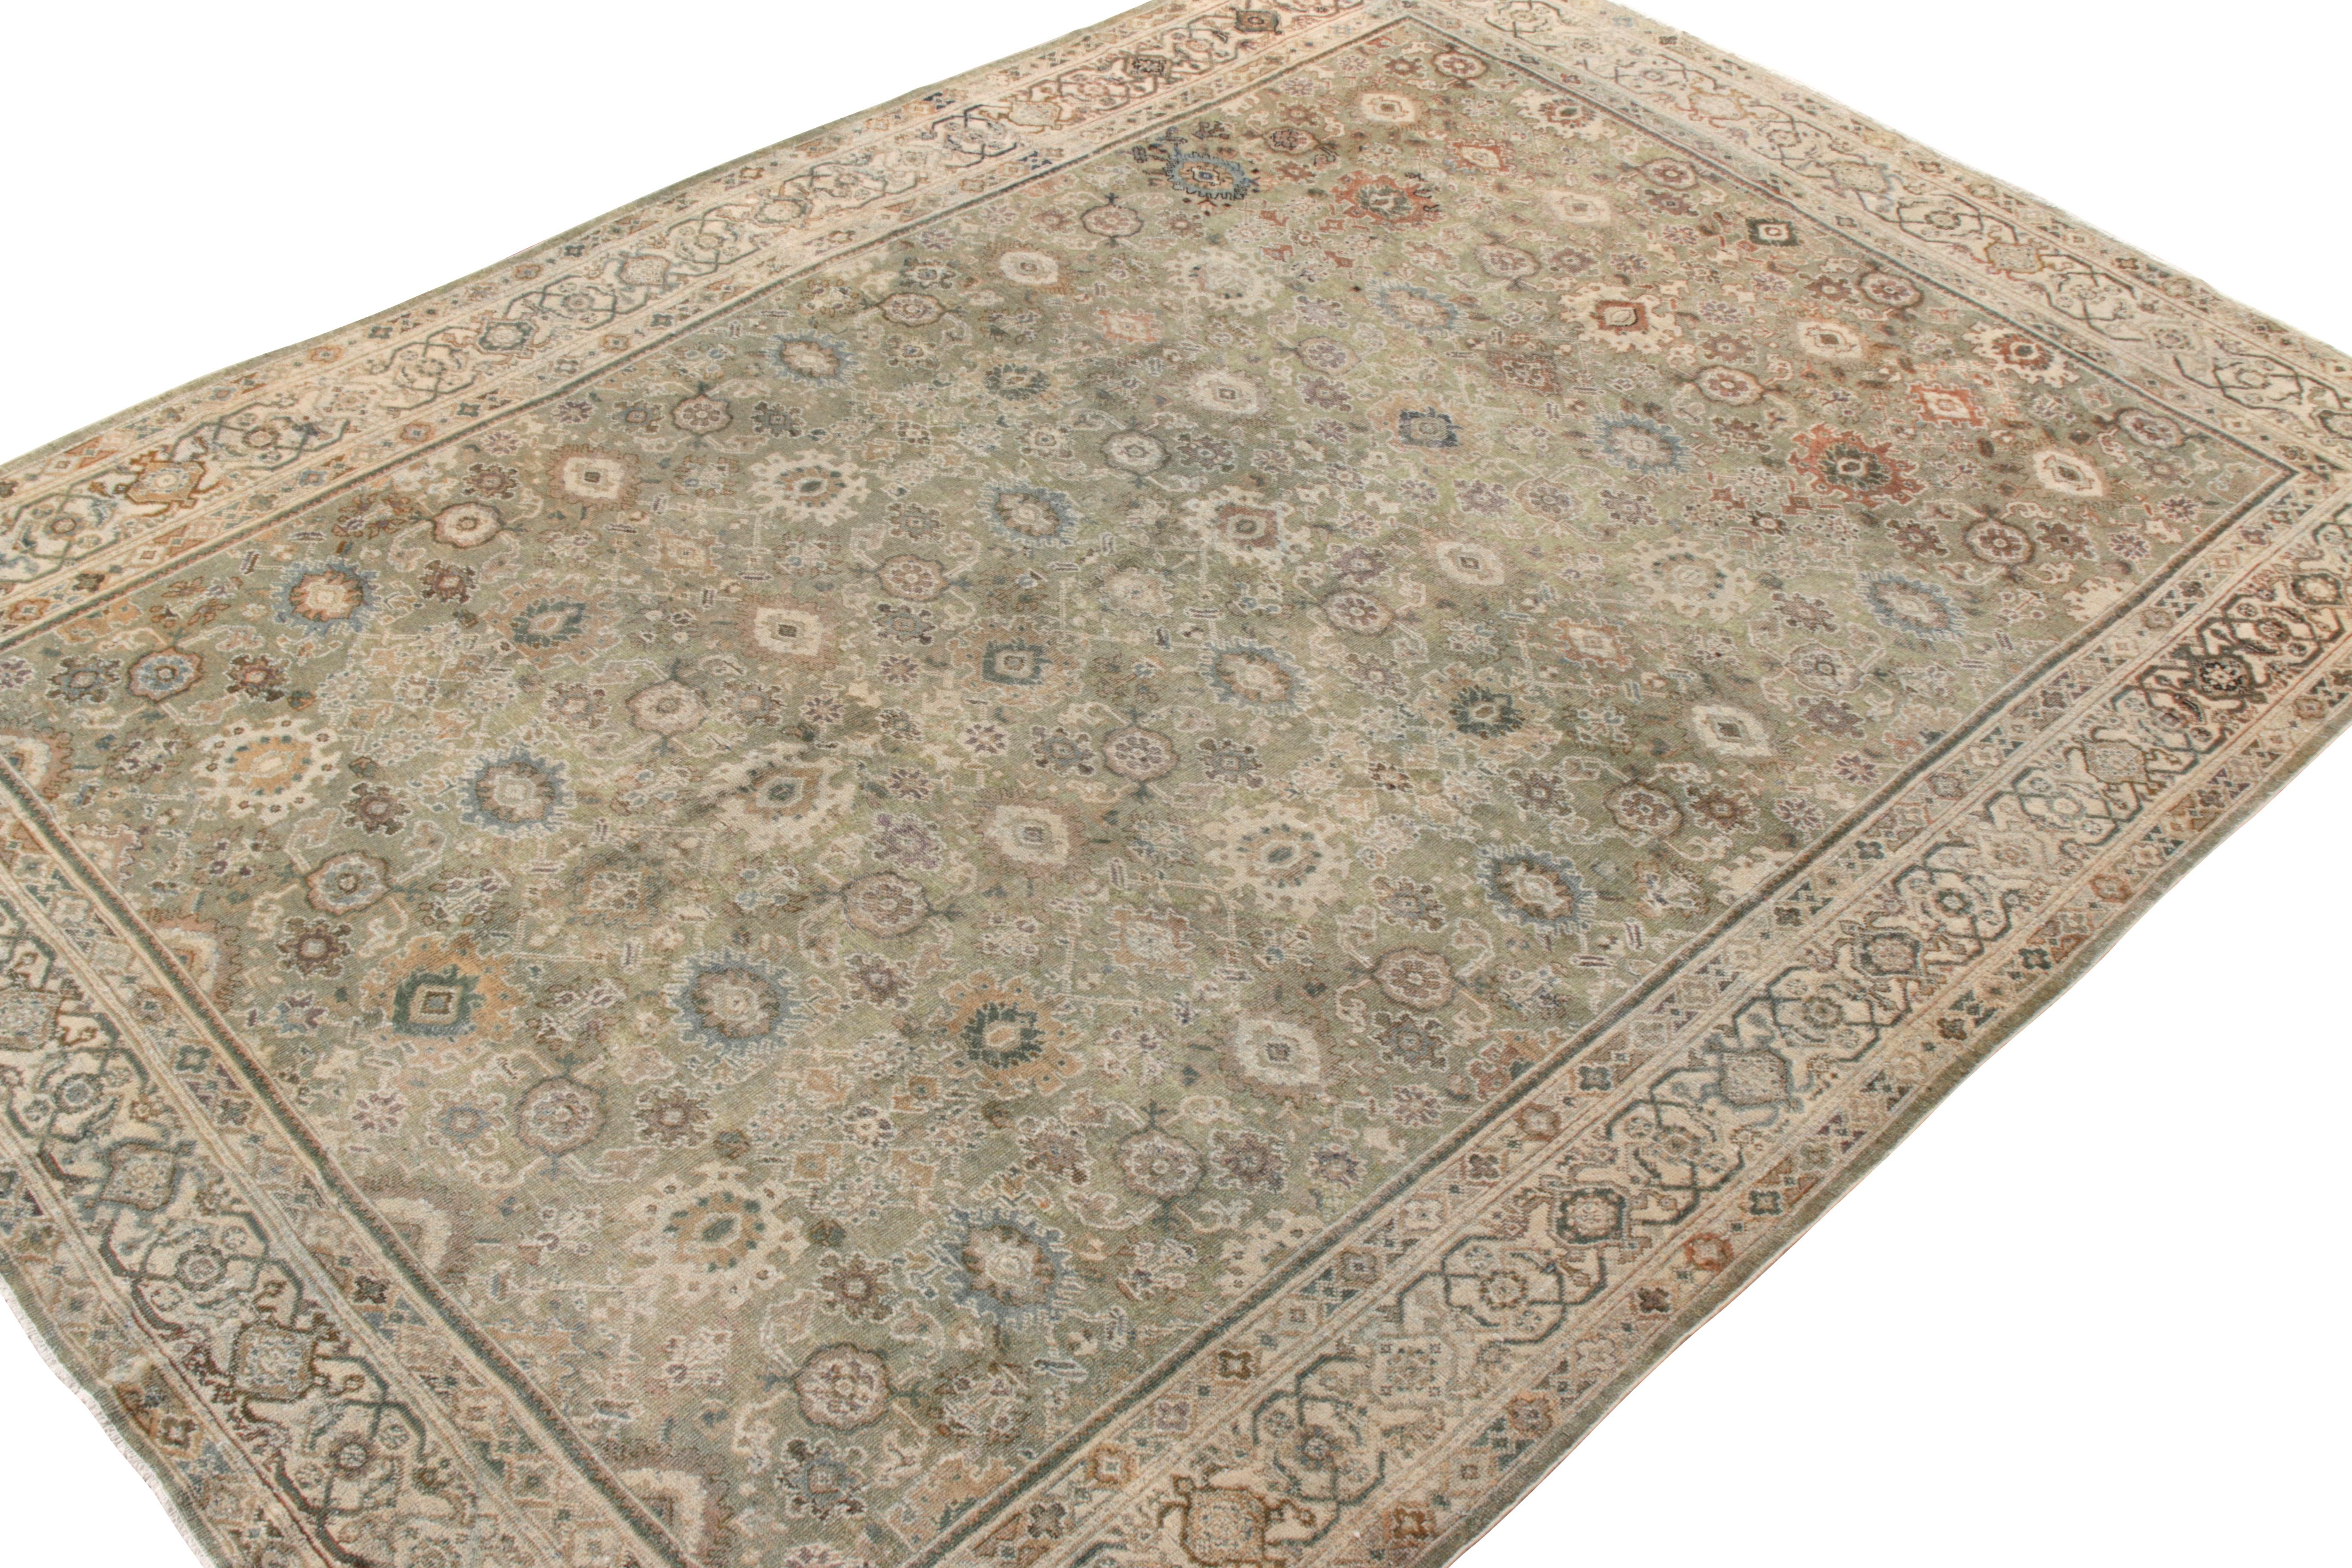 Indian Vintage Persian Sultanabad Rug in Green, Beige Floral Pattern by Rug & Kilim For Sale